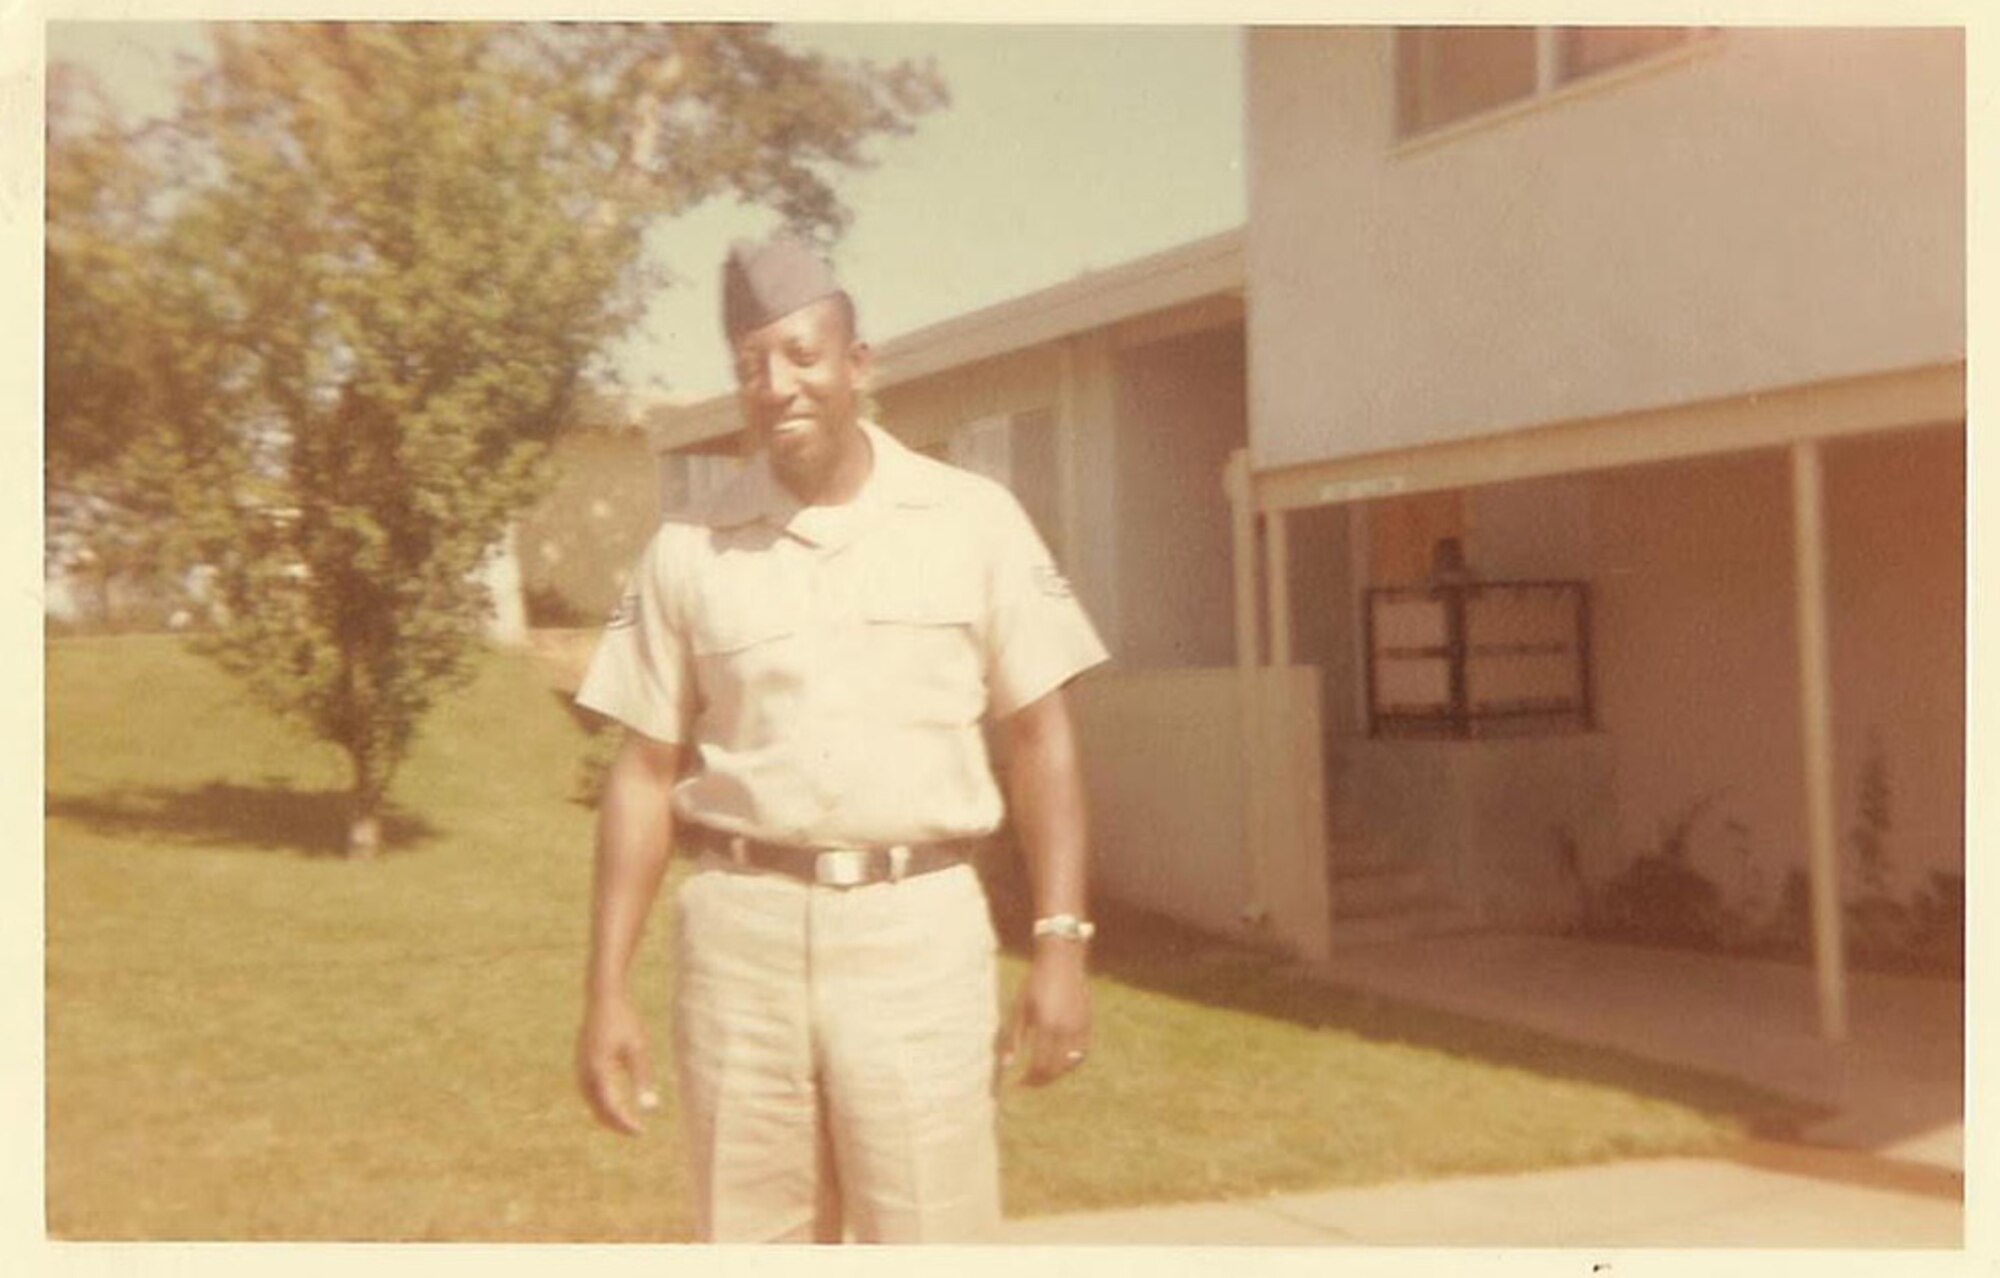 Retired Tech. Sgt. Lenard Ellison poses in front of a building at Beale Air Force Base, CA. in the late 1960s. Ellison, the patriarch of his family, began a family tradition of serving in the Air Force that continues today. Since 1947, there has been an Ellison in the Air Force. (Courtesy photo)